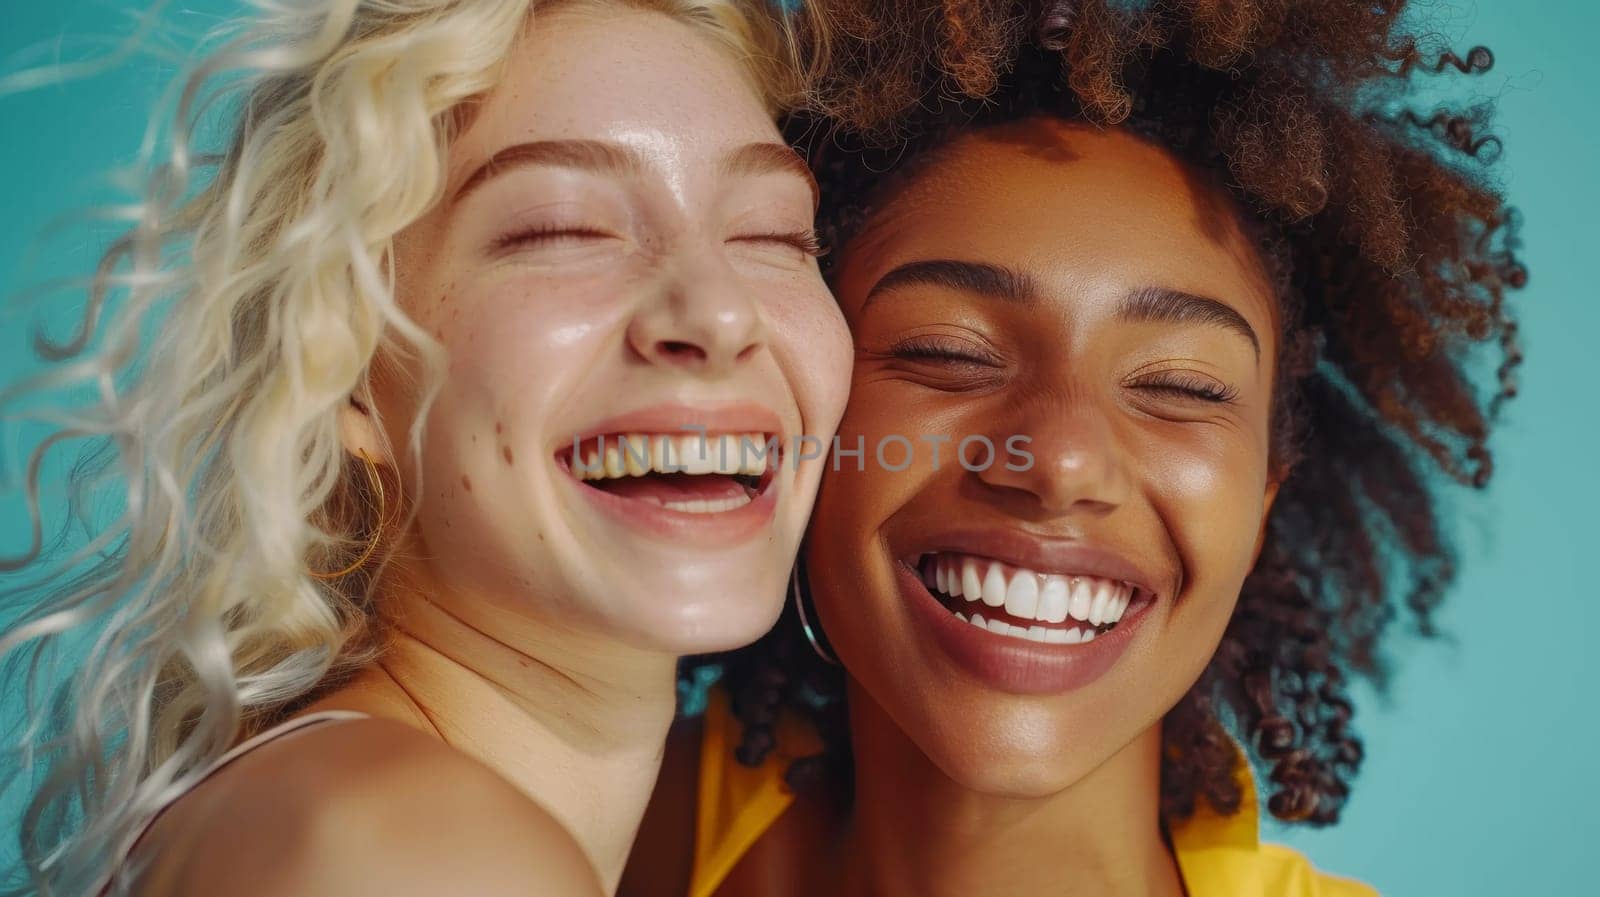 Two women are smiling and laughing while one has her eyes closed